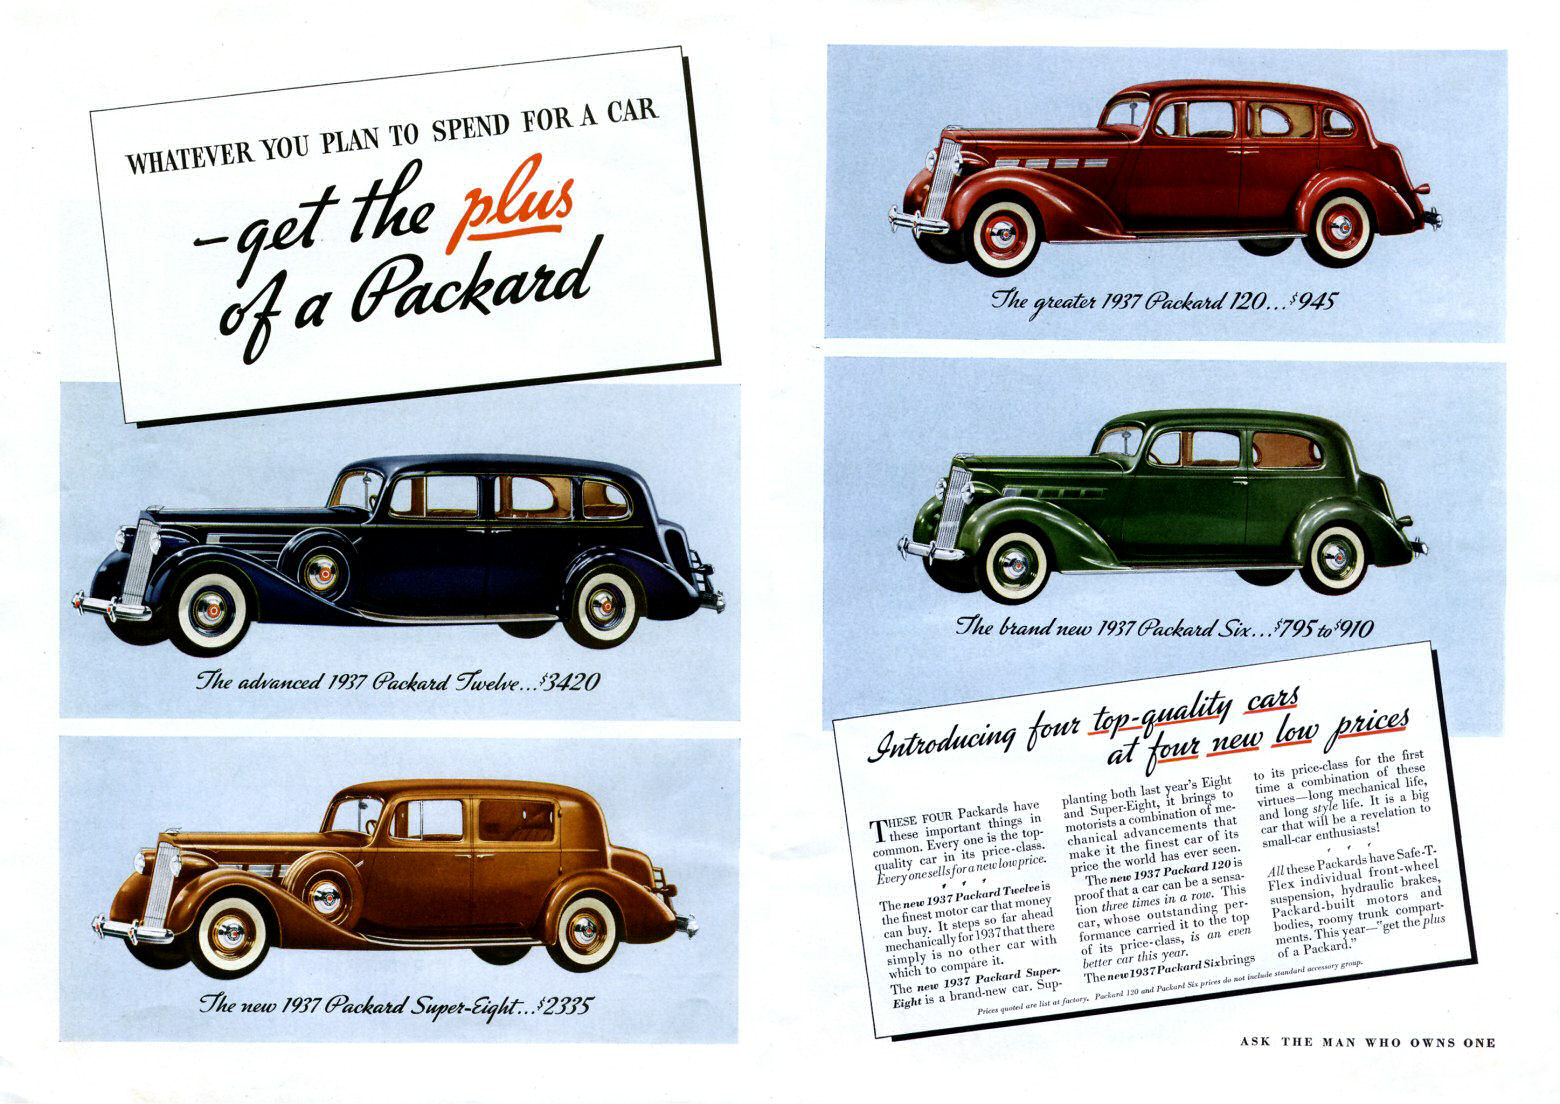 1937 Packard Auto Advertising